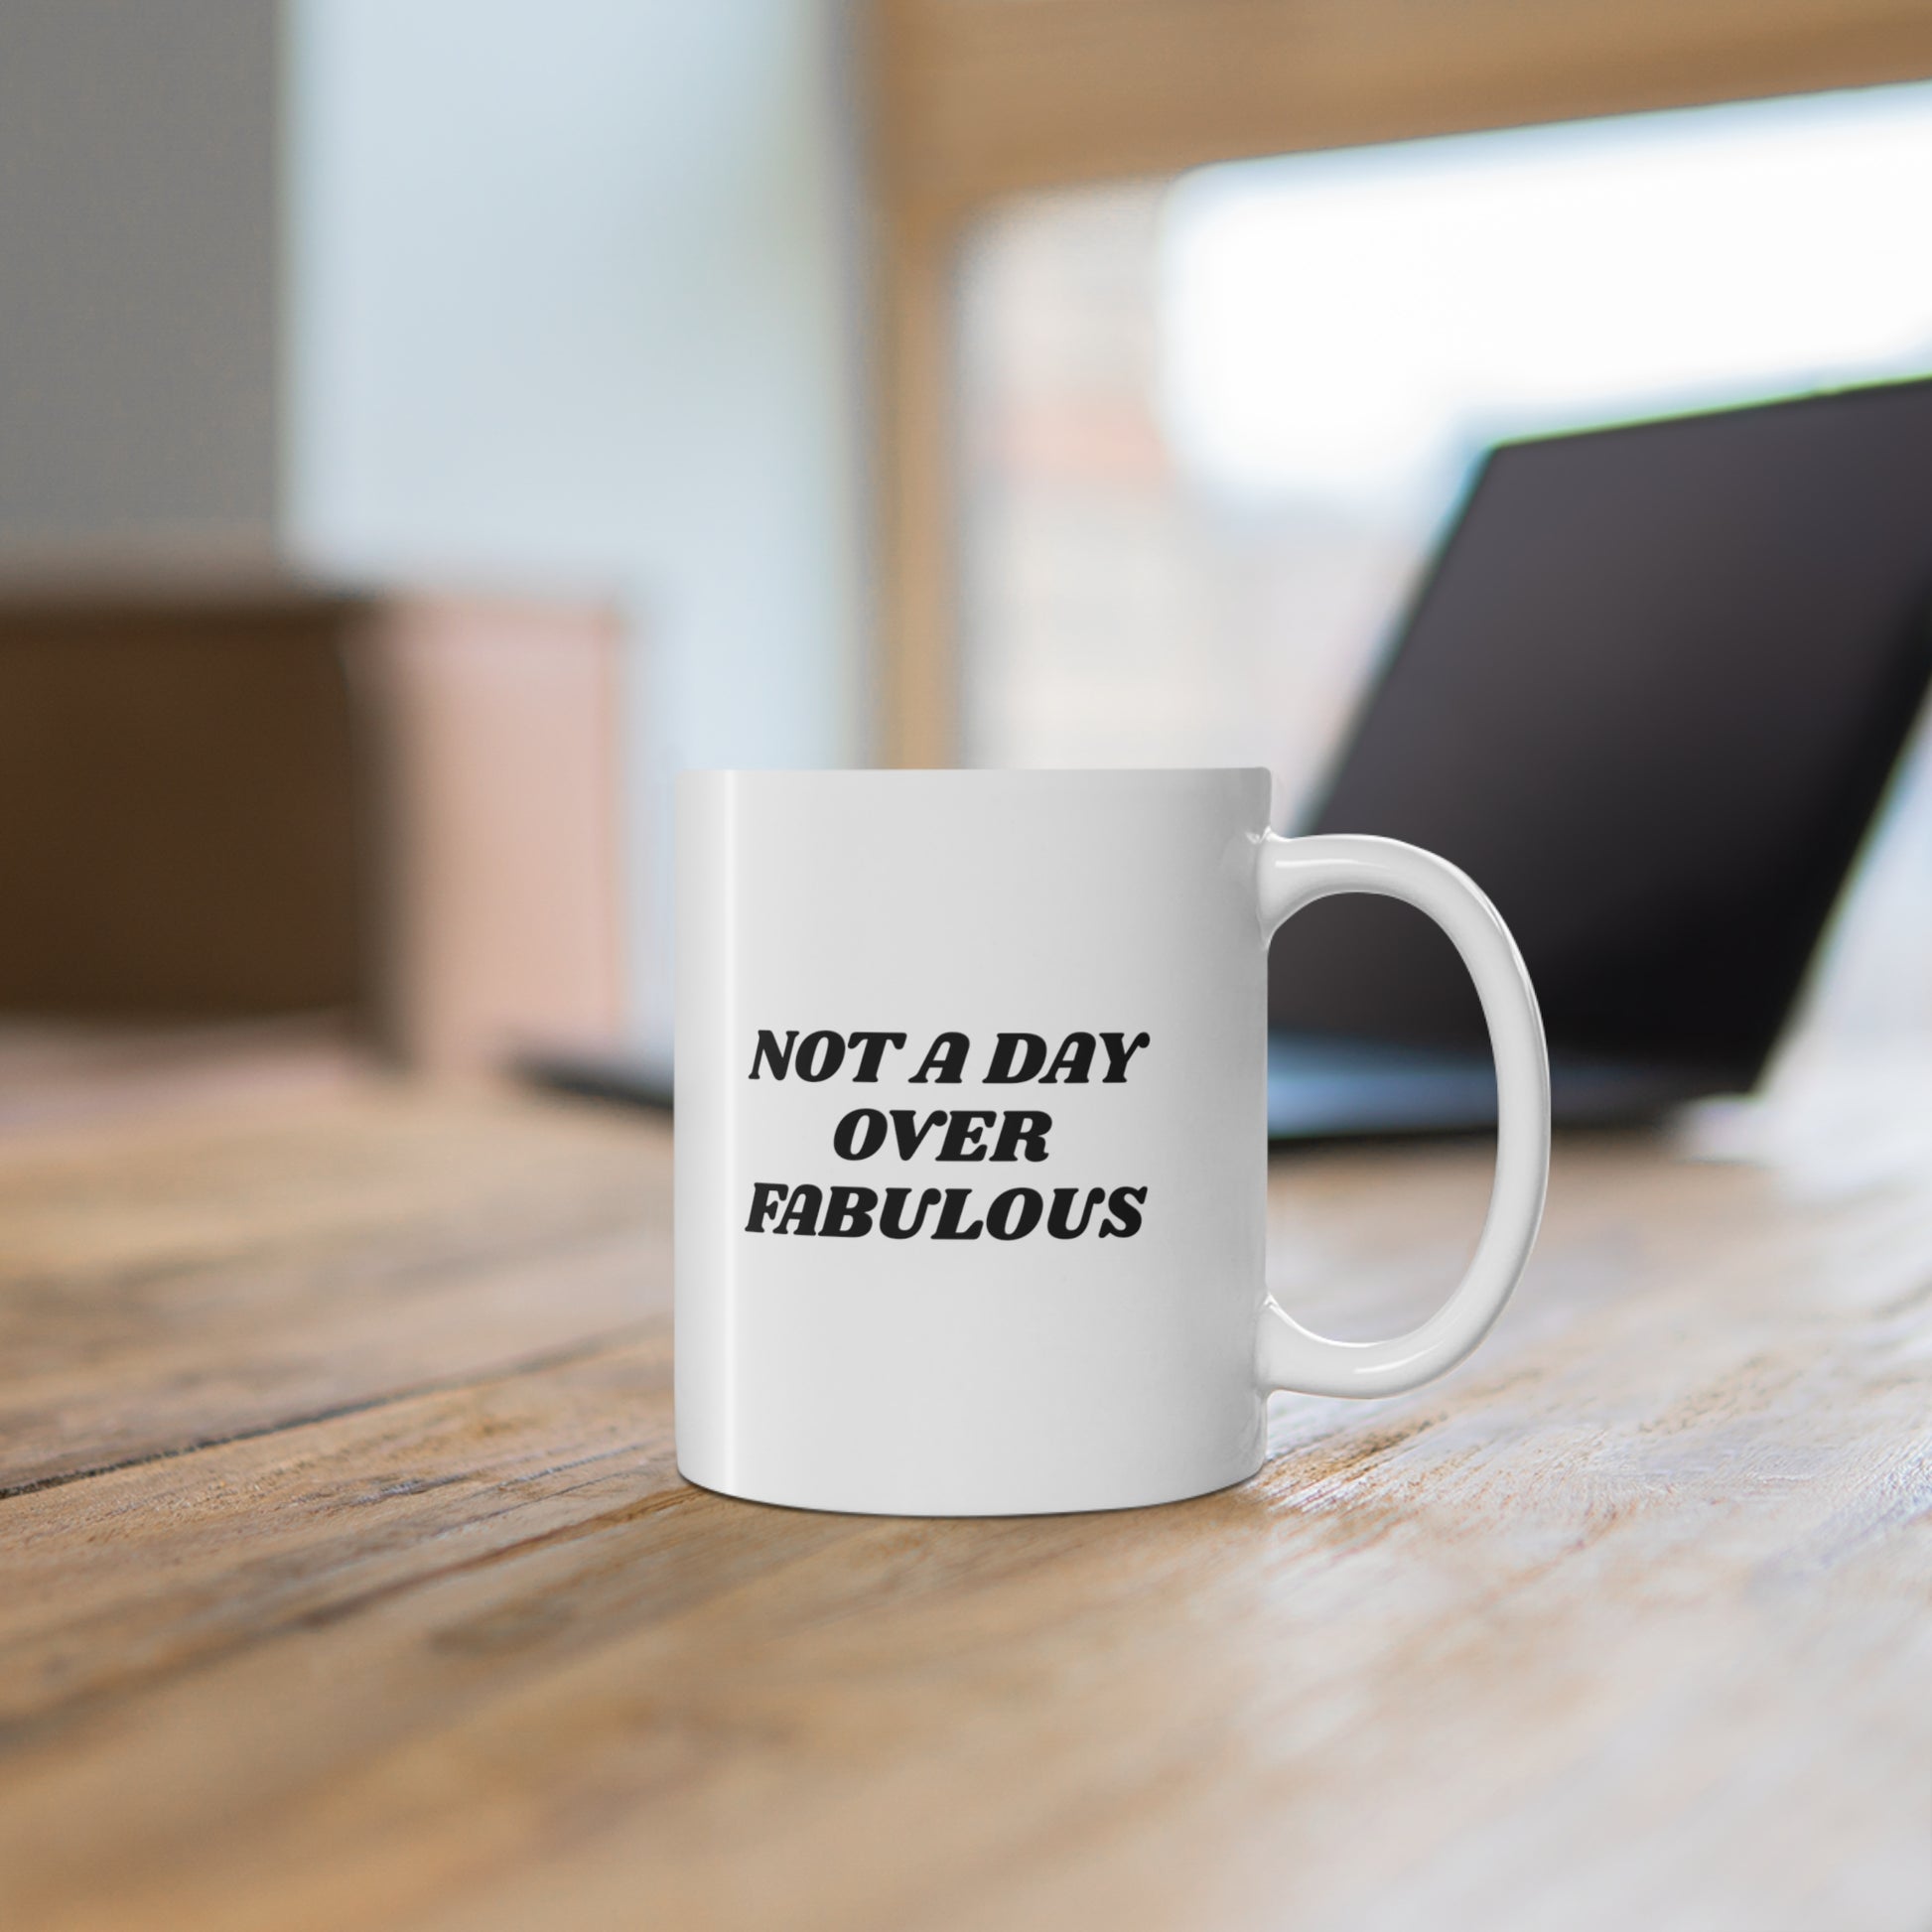 11oz ceramic mug with quote Not a Day Over Fabulous